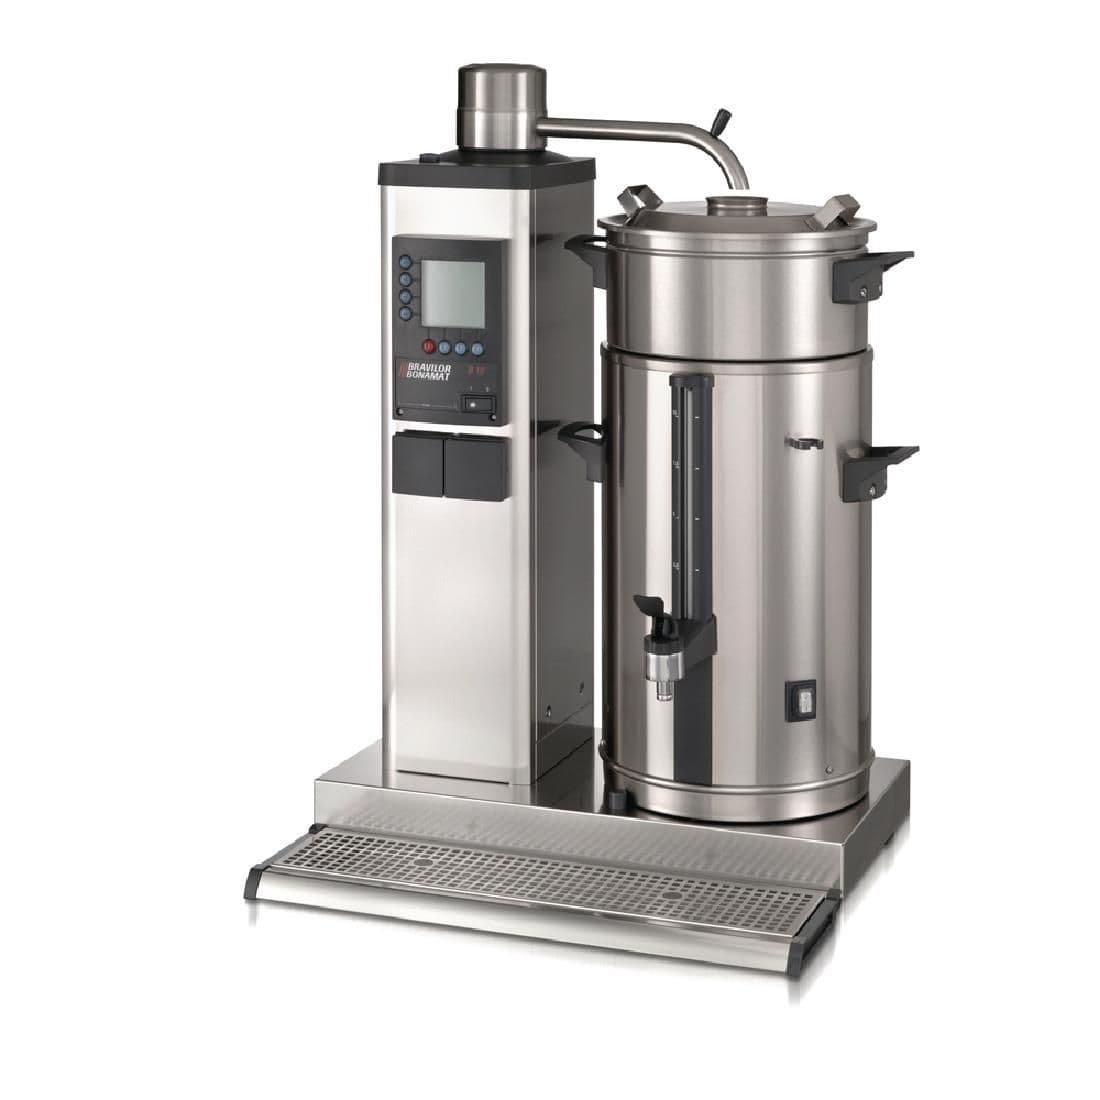 DC677-1P Bravilor B10 R Bulk Coffee Brewer with 10Ltr Coffee Urn Single Phase JD Catering Equipment Solutions Ltd